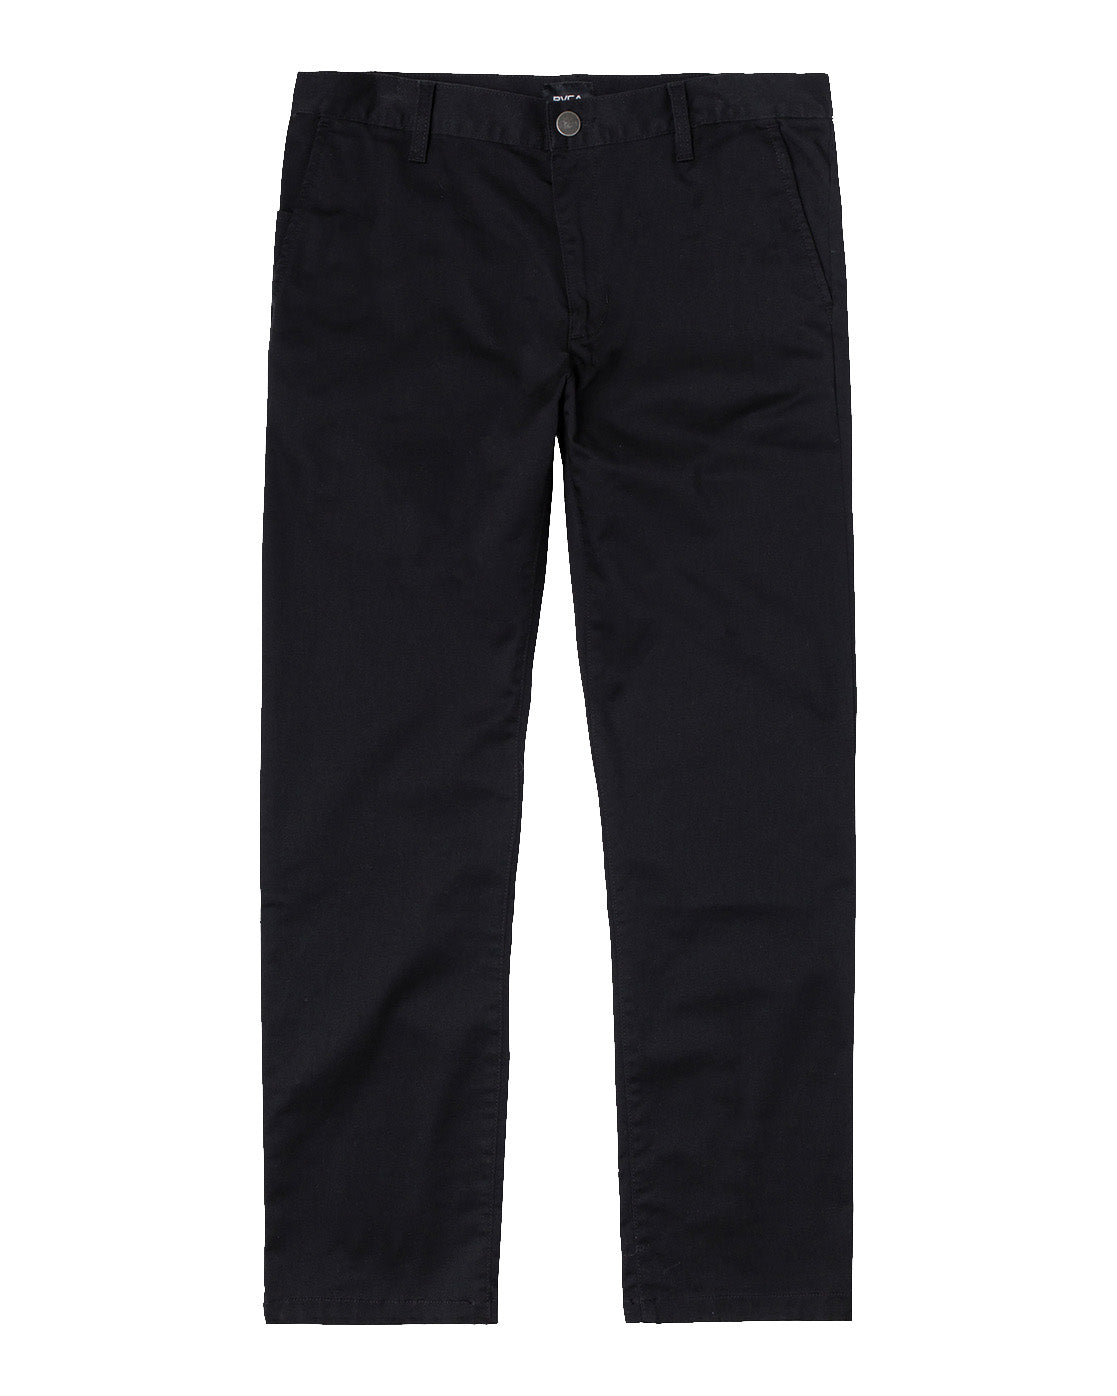 RVCA The Weekend Stretch Pant BLK 30